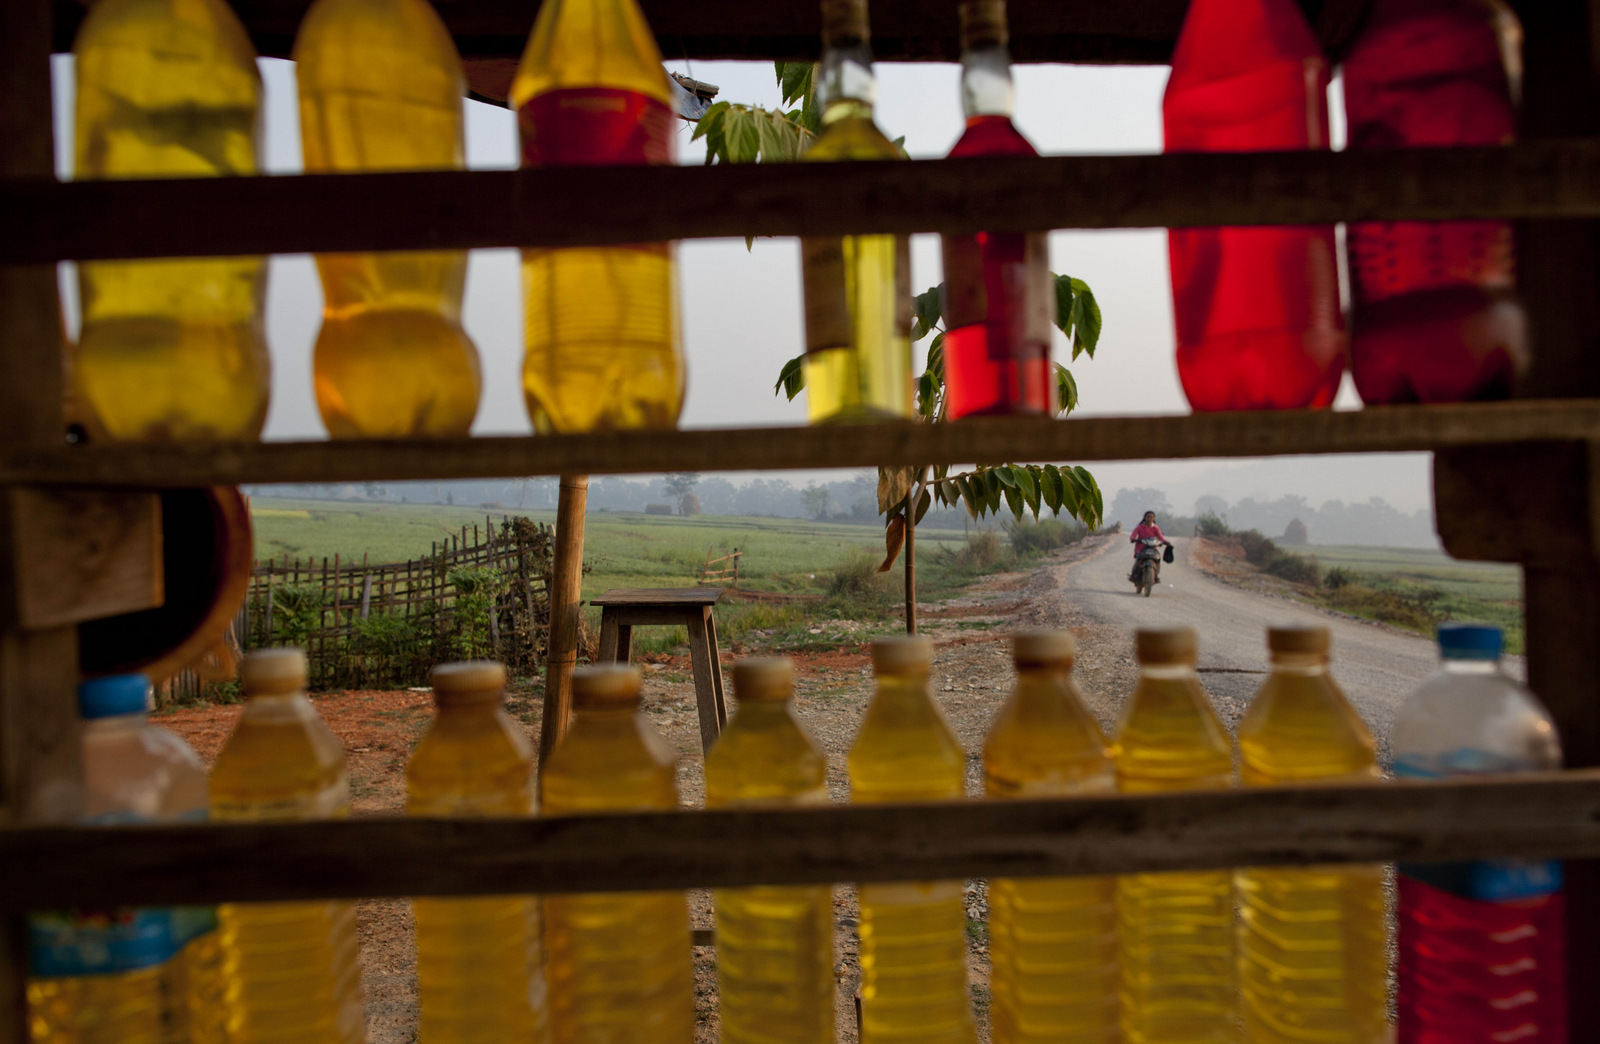 Gasoline filled in to plastic bottles are on display at a roadside shop in Mong Pan, Northern Shan estate, Myanmar. Myanmar put over 20 offshore oil and gas exploration blocks up for auction as the country pushed to attract foreign investment. (AP/Gemunu Amarasinghe)